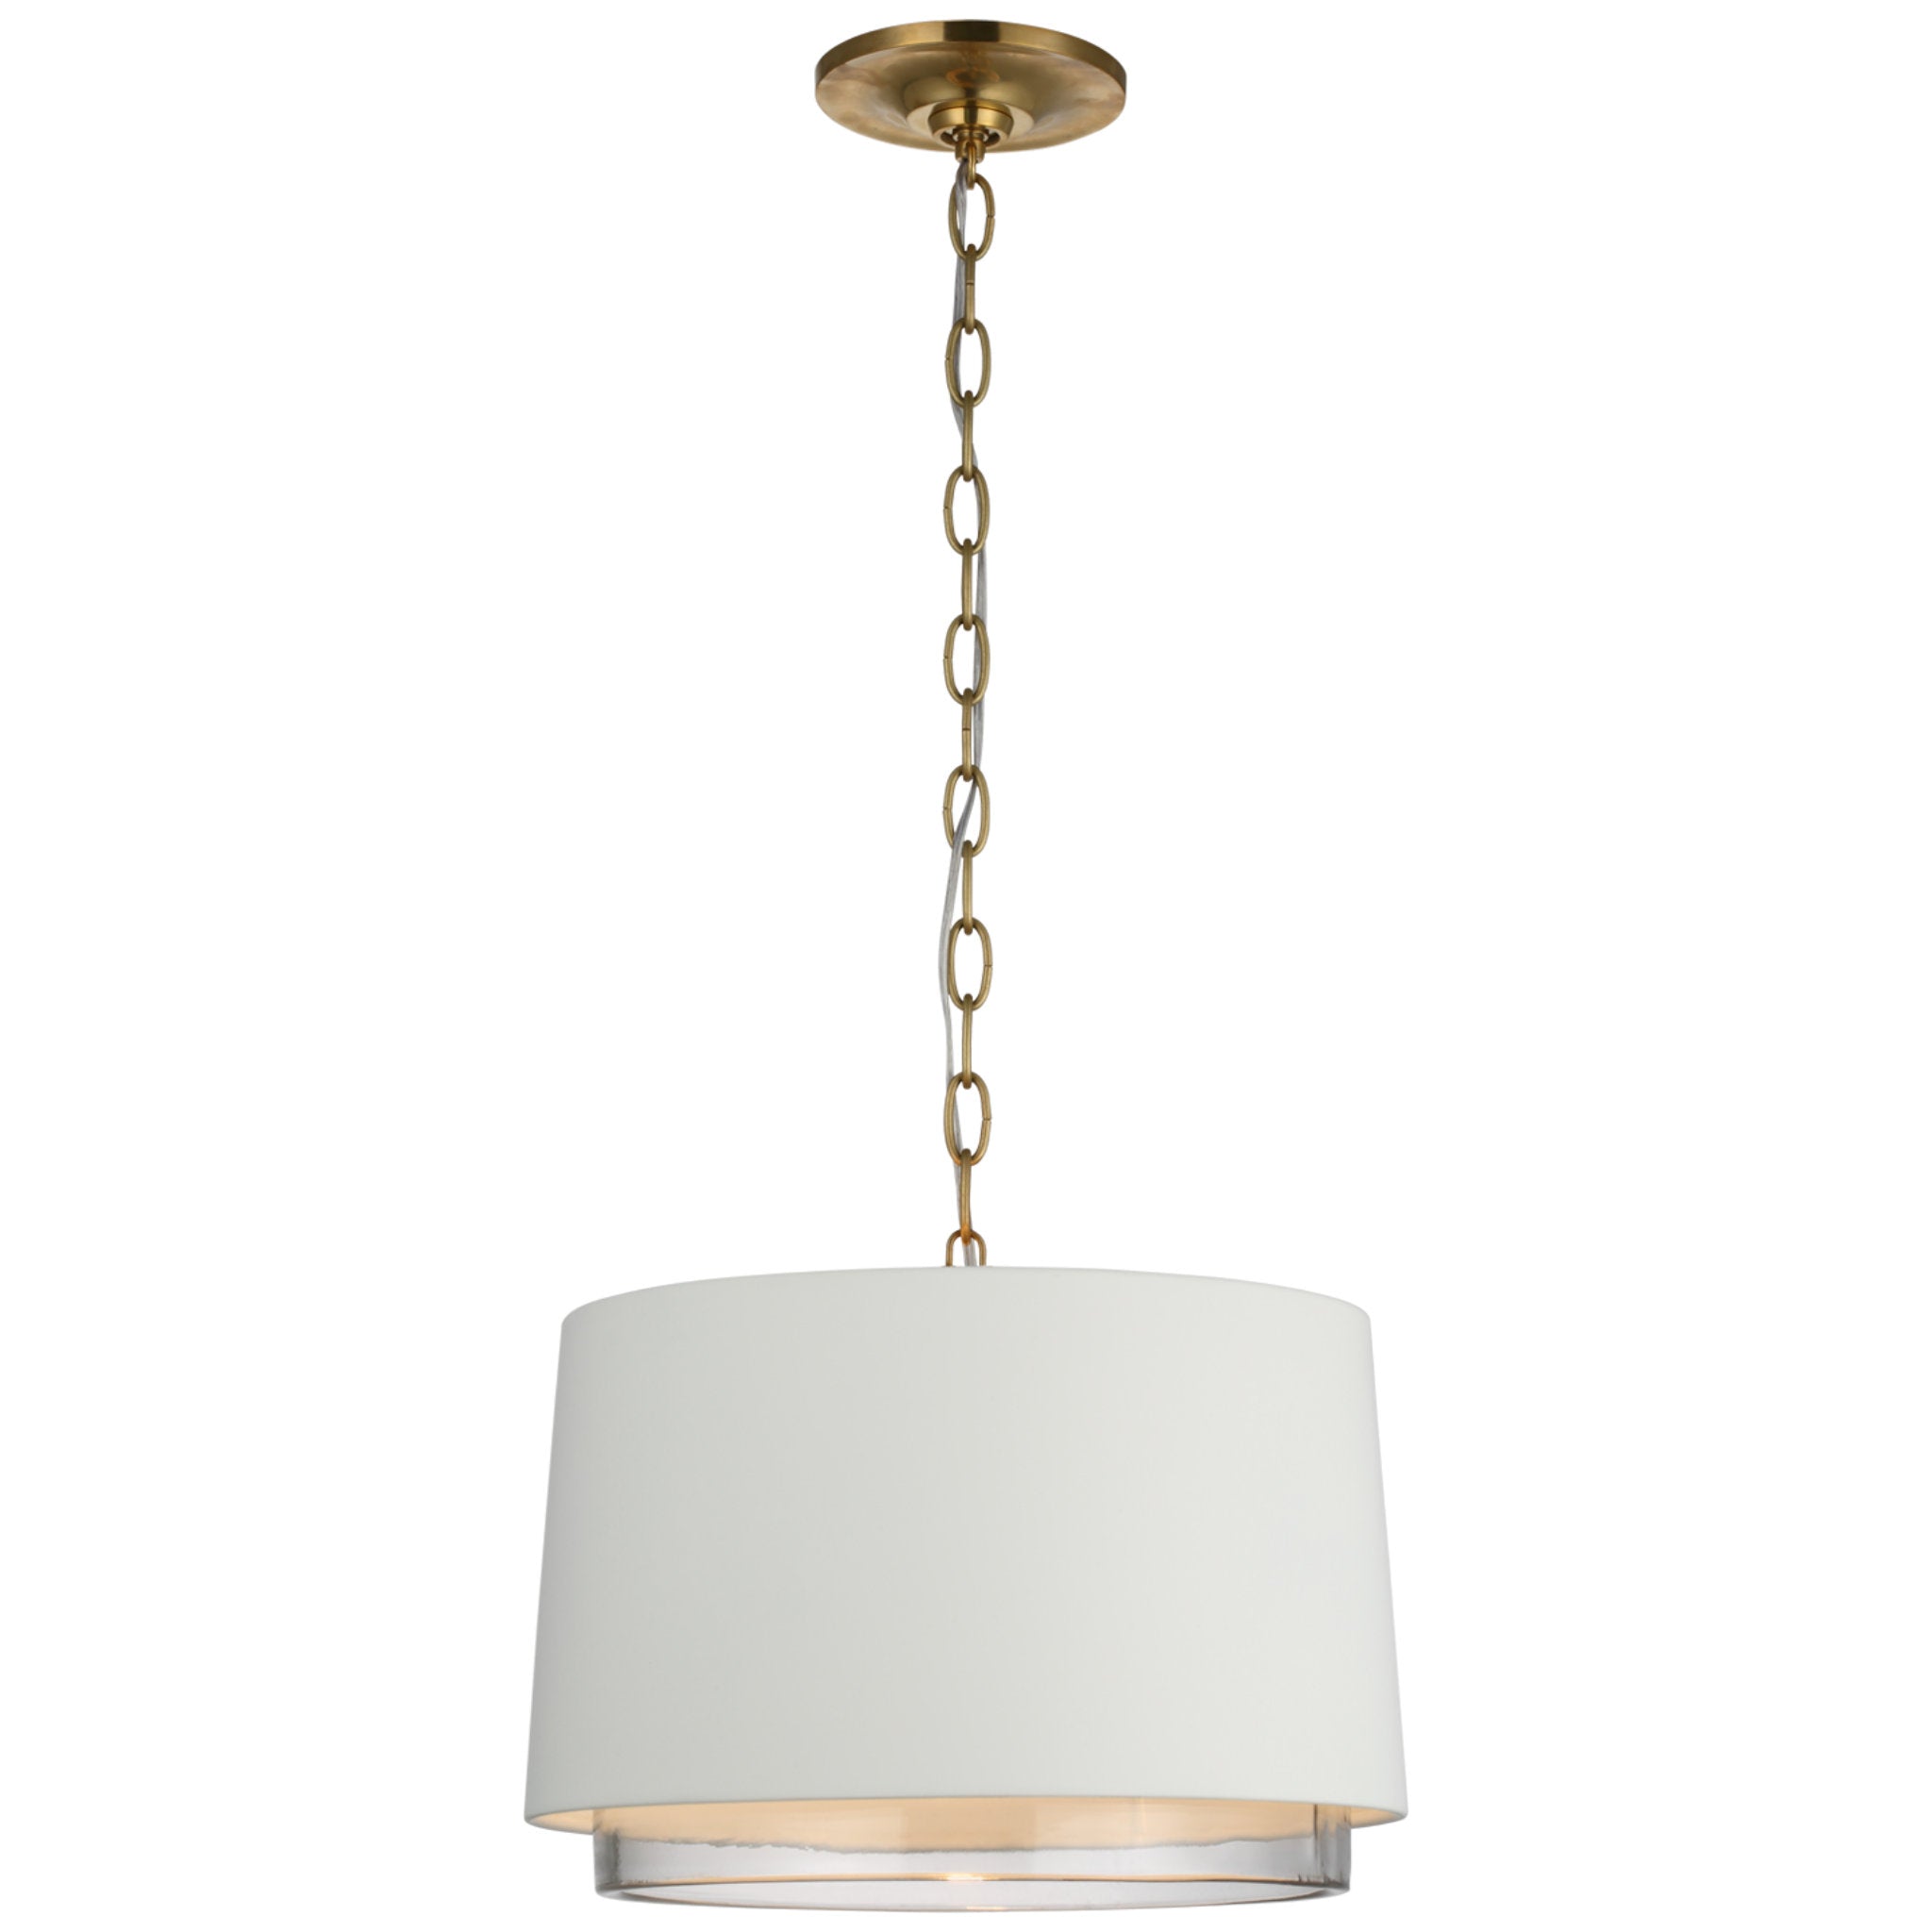 Marie Flanigan Sydney Small Pendant in Soft Brass with Matte White and Clear Glass